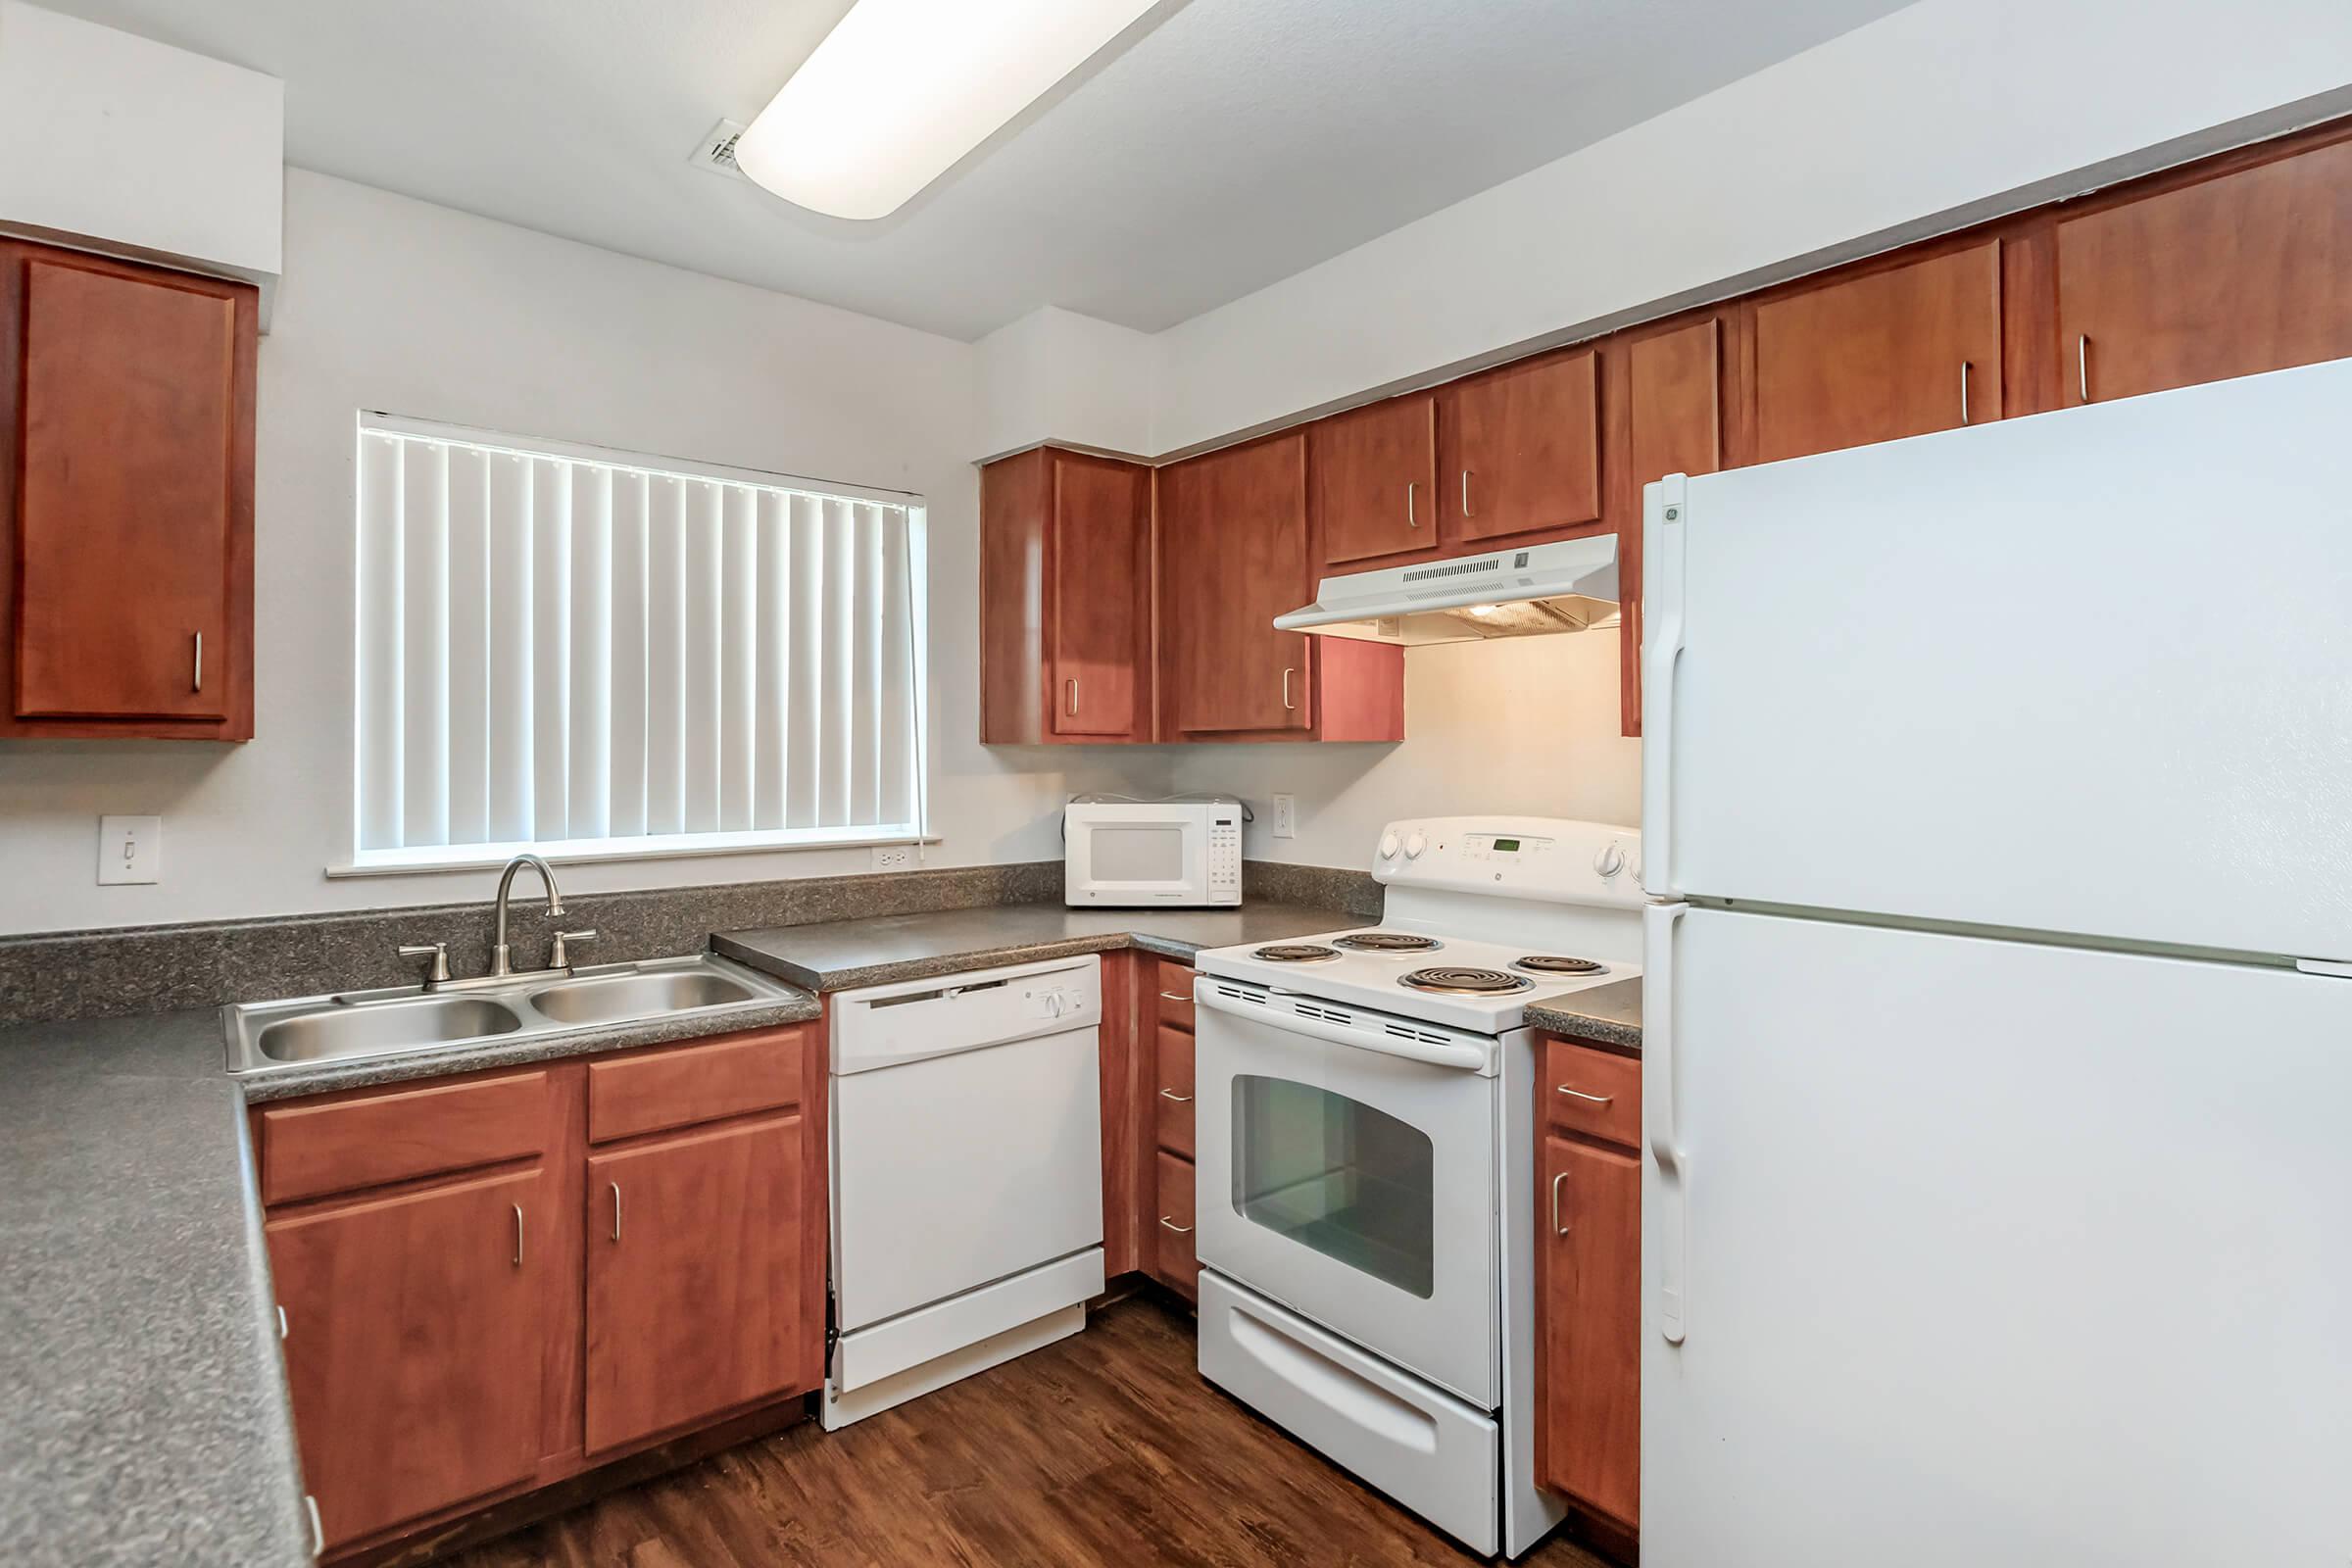 FULLY-EQUIPPED KITCHEN IN PFLUGERVILLE, TX